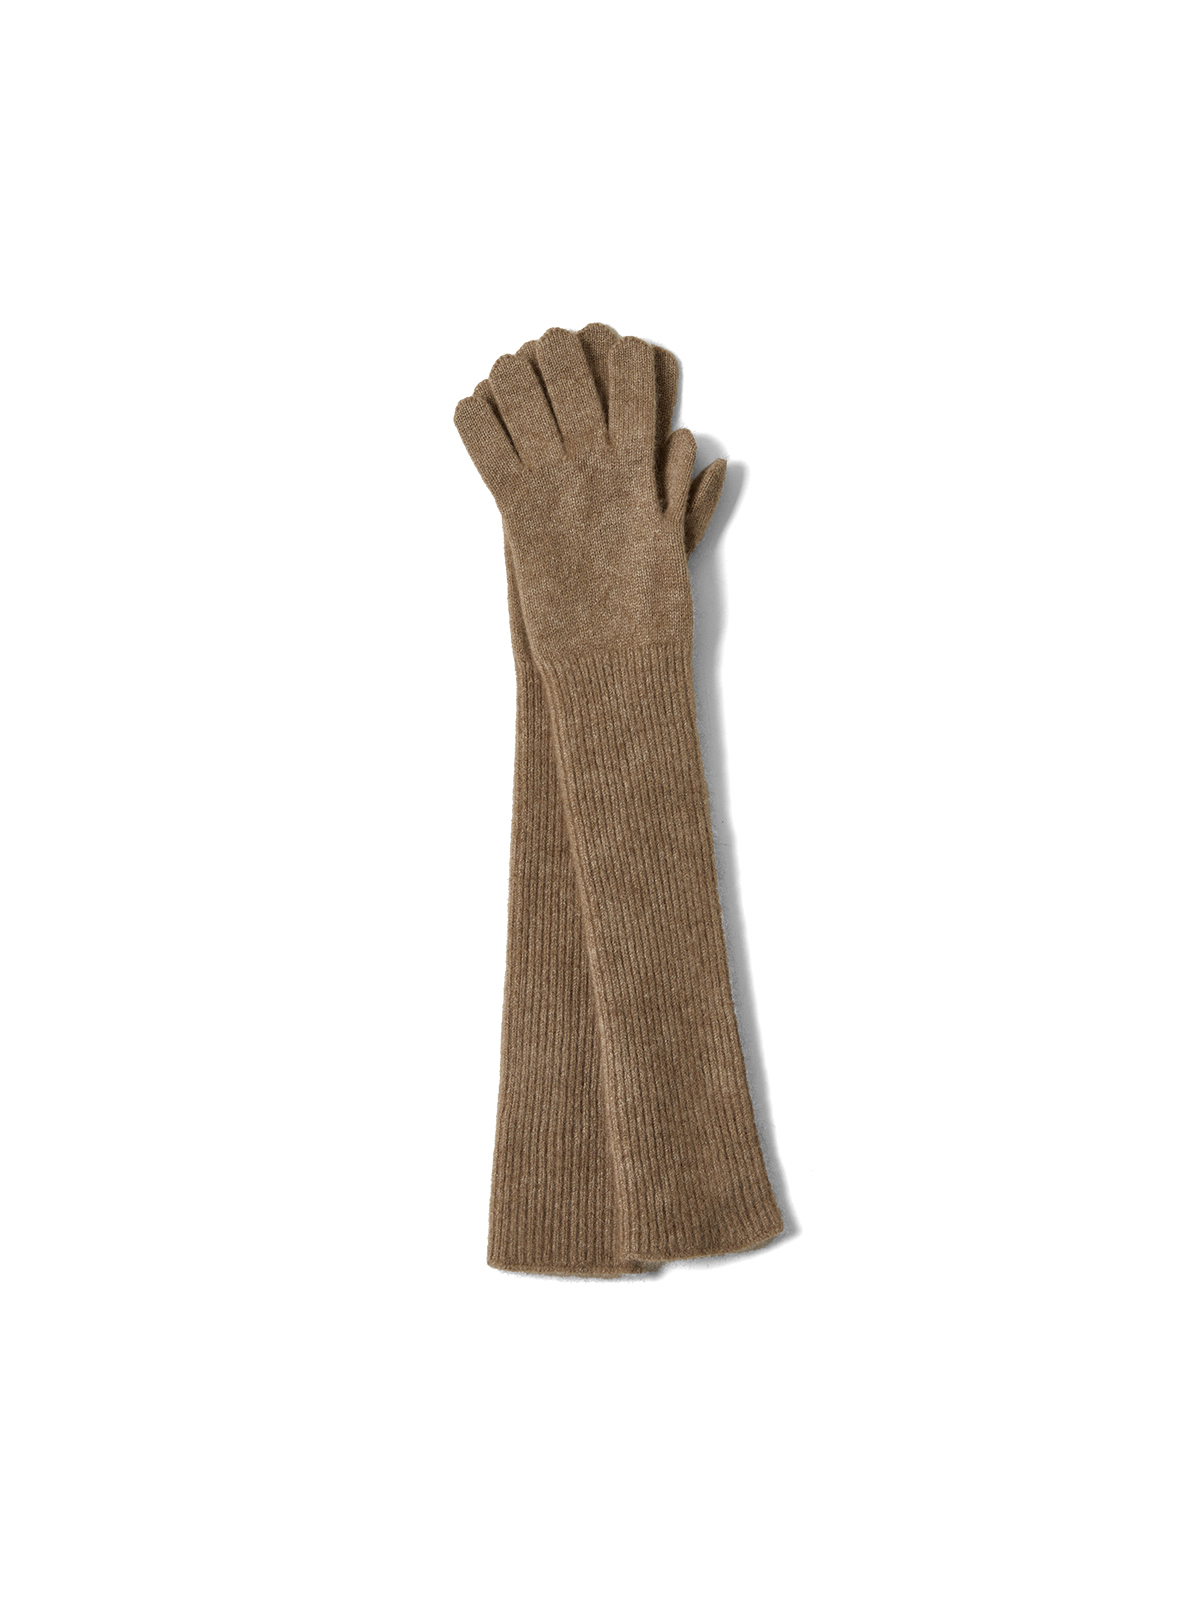 BABY CASHMERE KNIT LONG GLOVES (NATURAL BROWN)